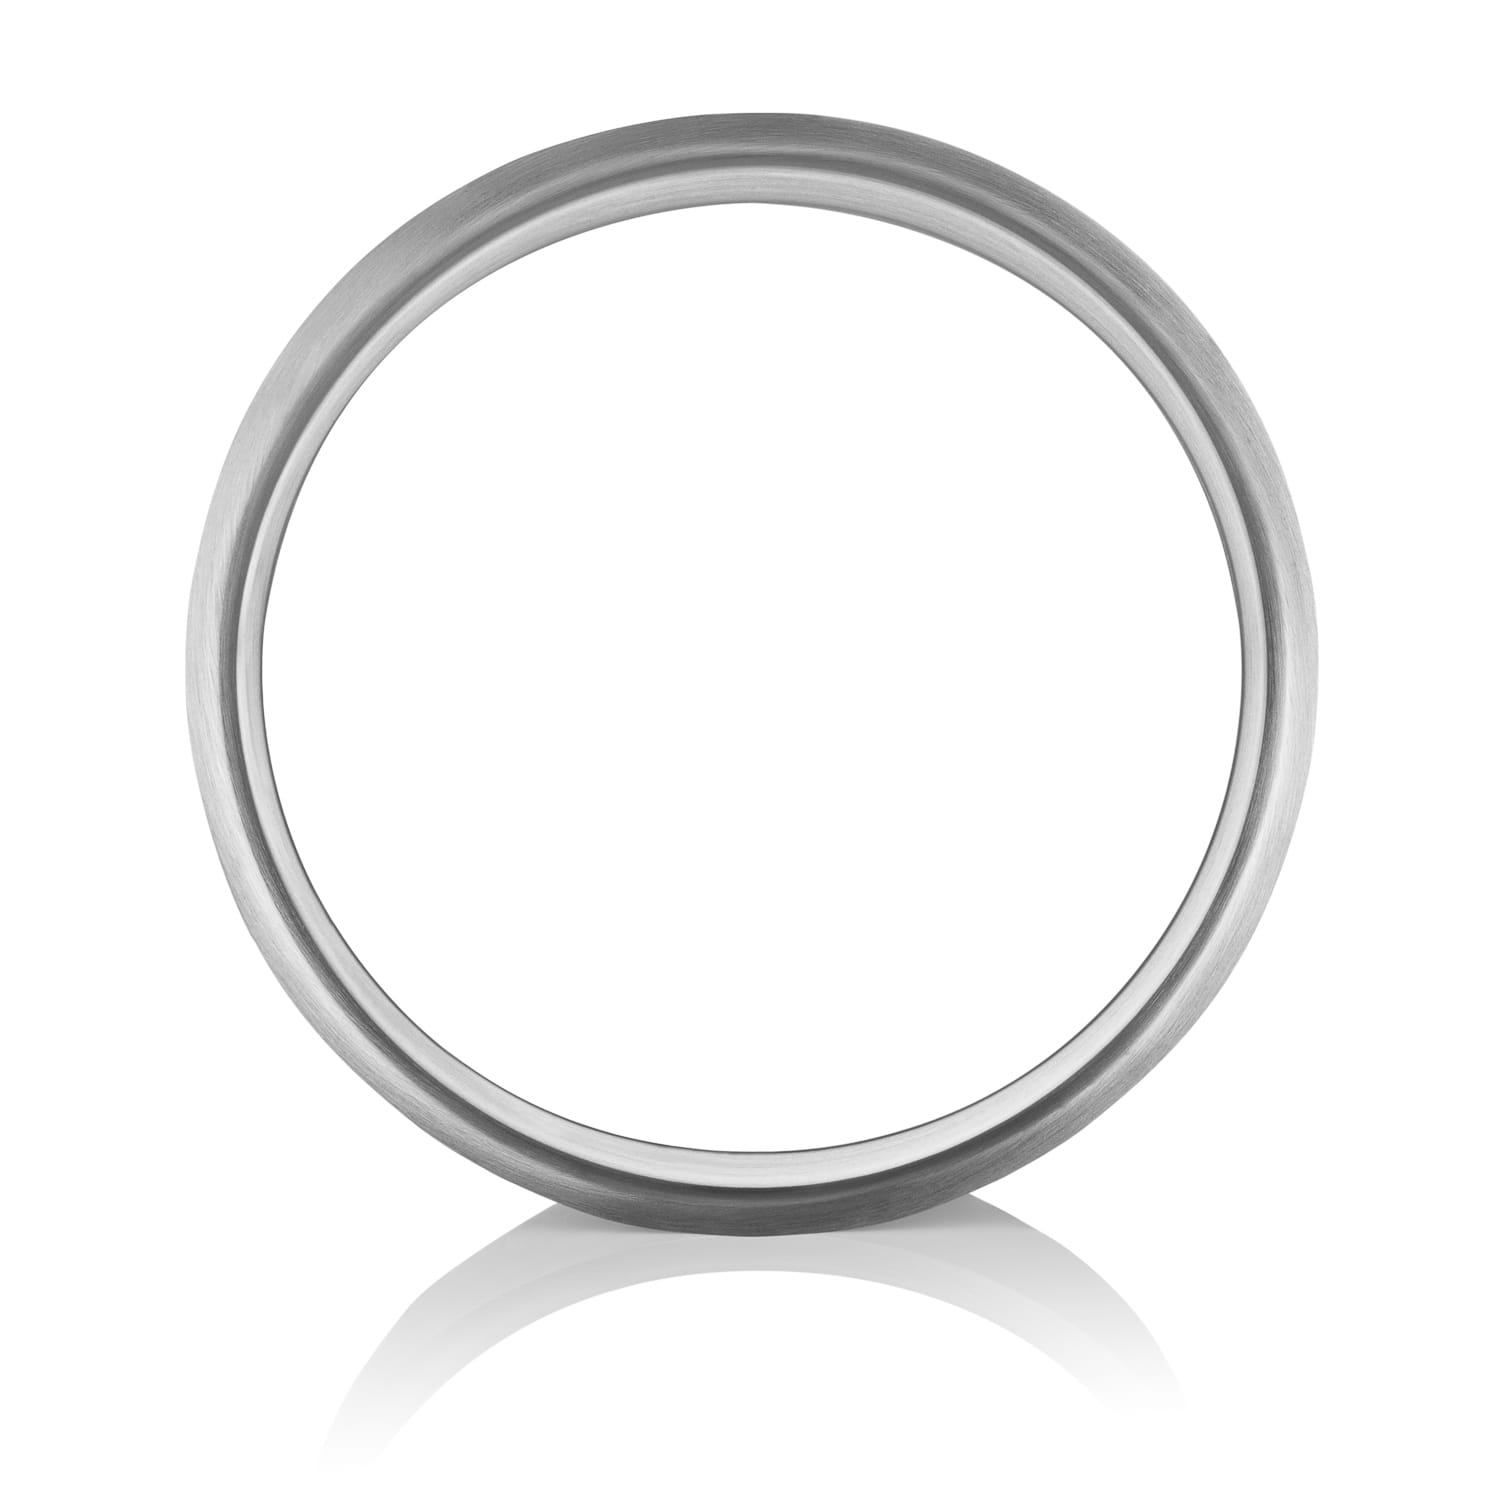 Stainless steel ring for integrated bin